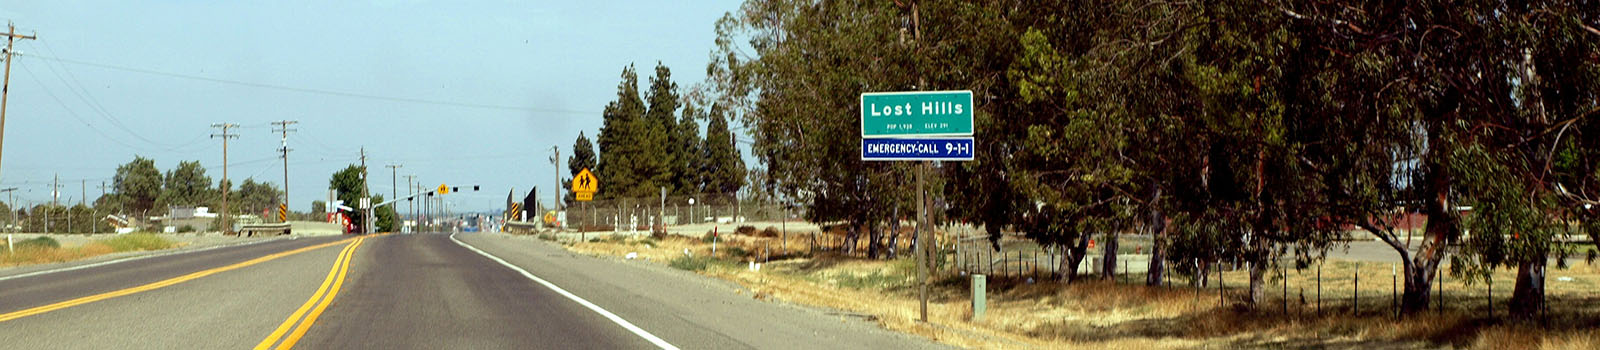 We buy any house as-is condition Cash in Lost Hills California